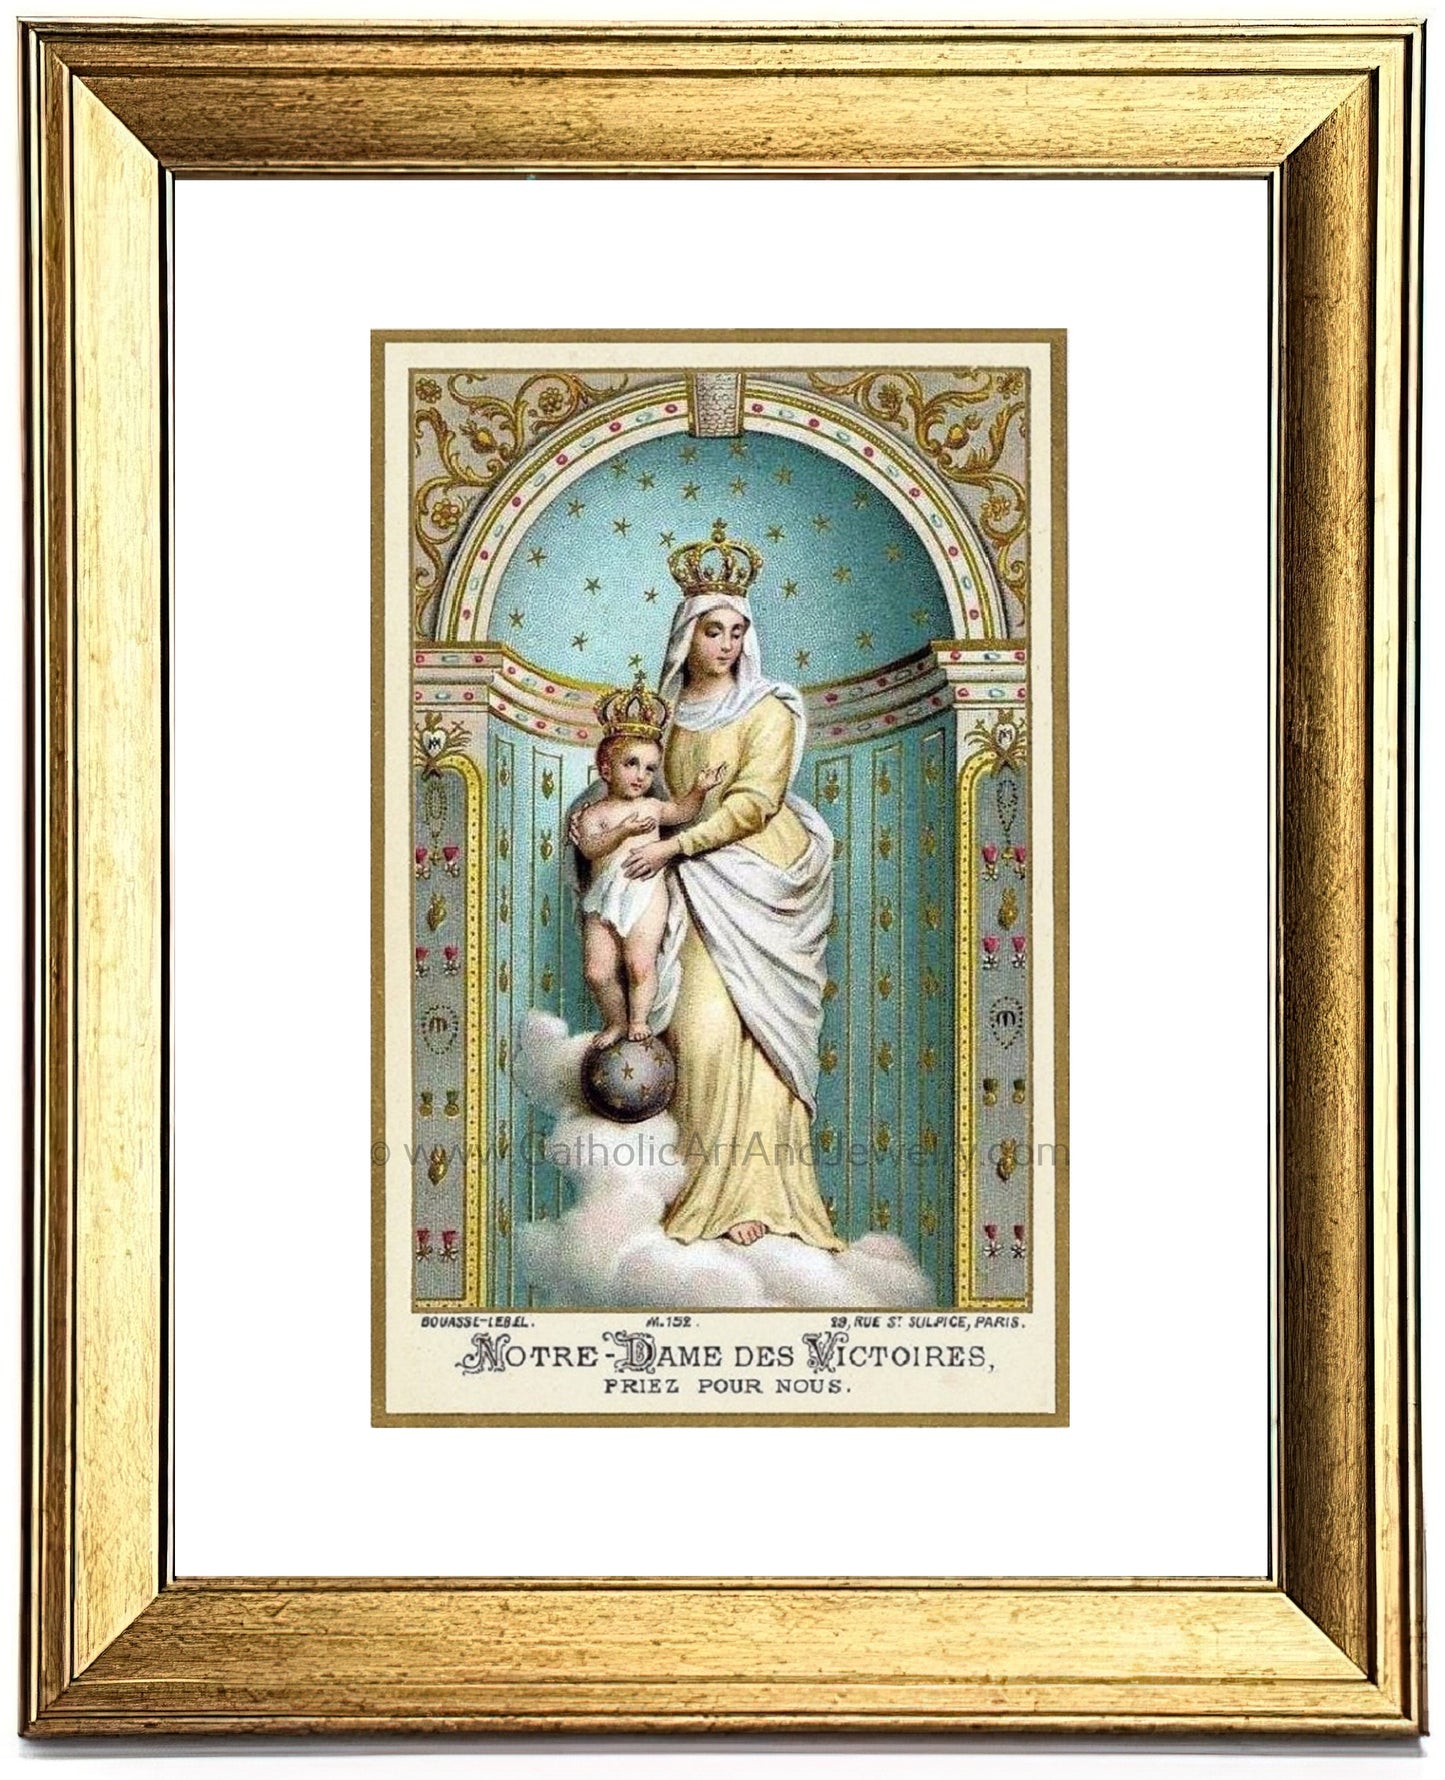 Our Lady of Victory – based on a Vintage French Holy Card – Catholic Art Print – Unique Catholic Gift